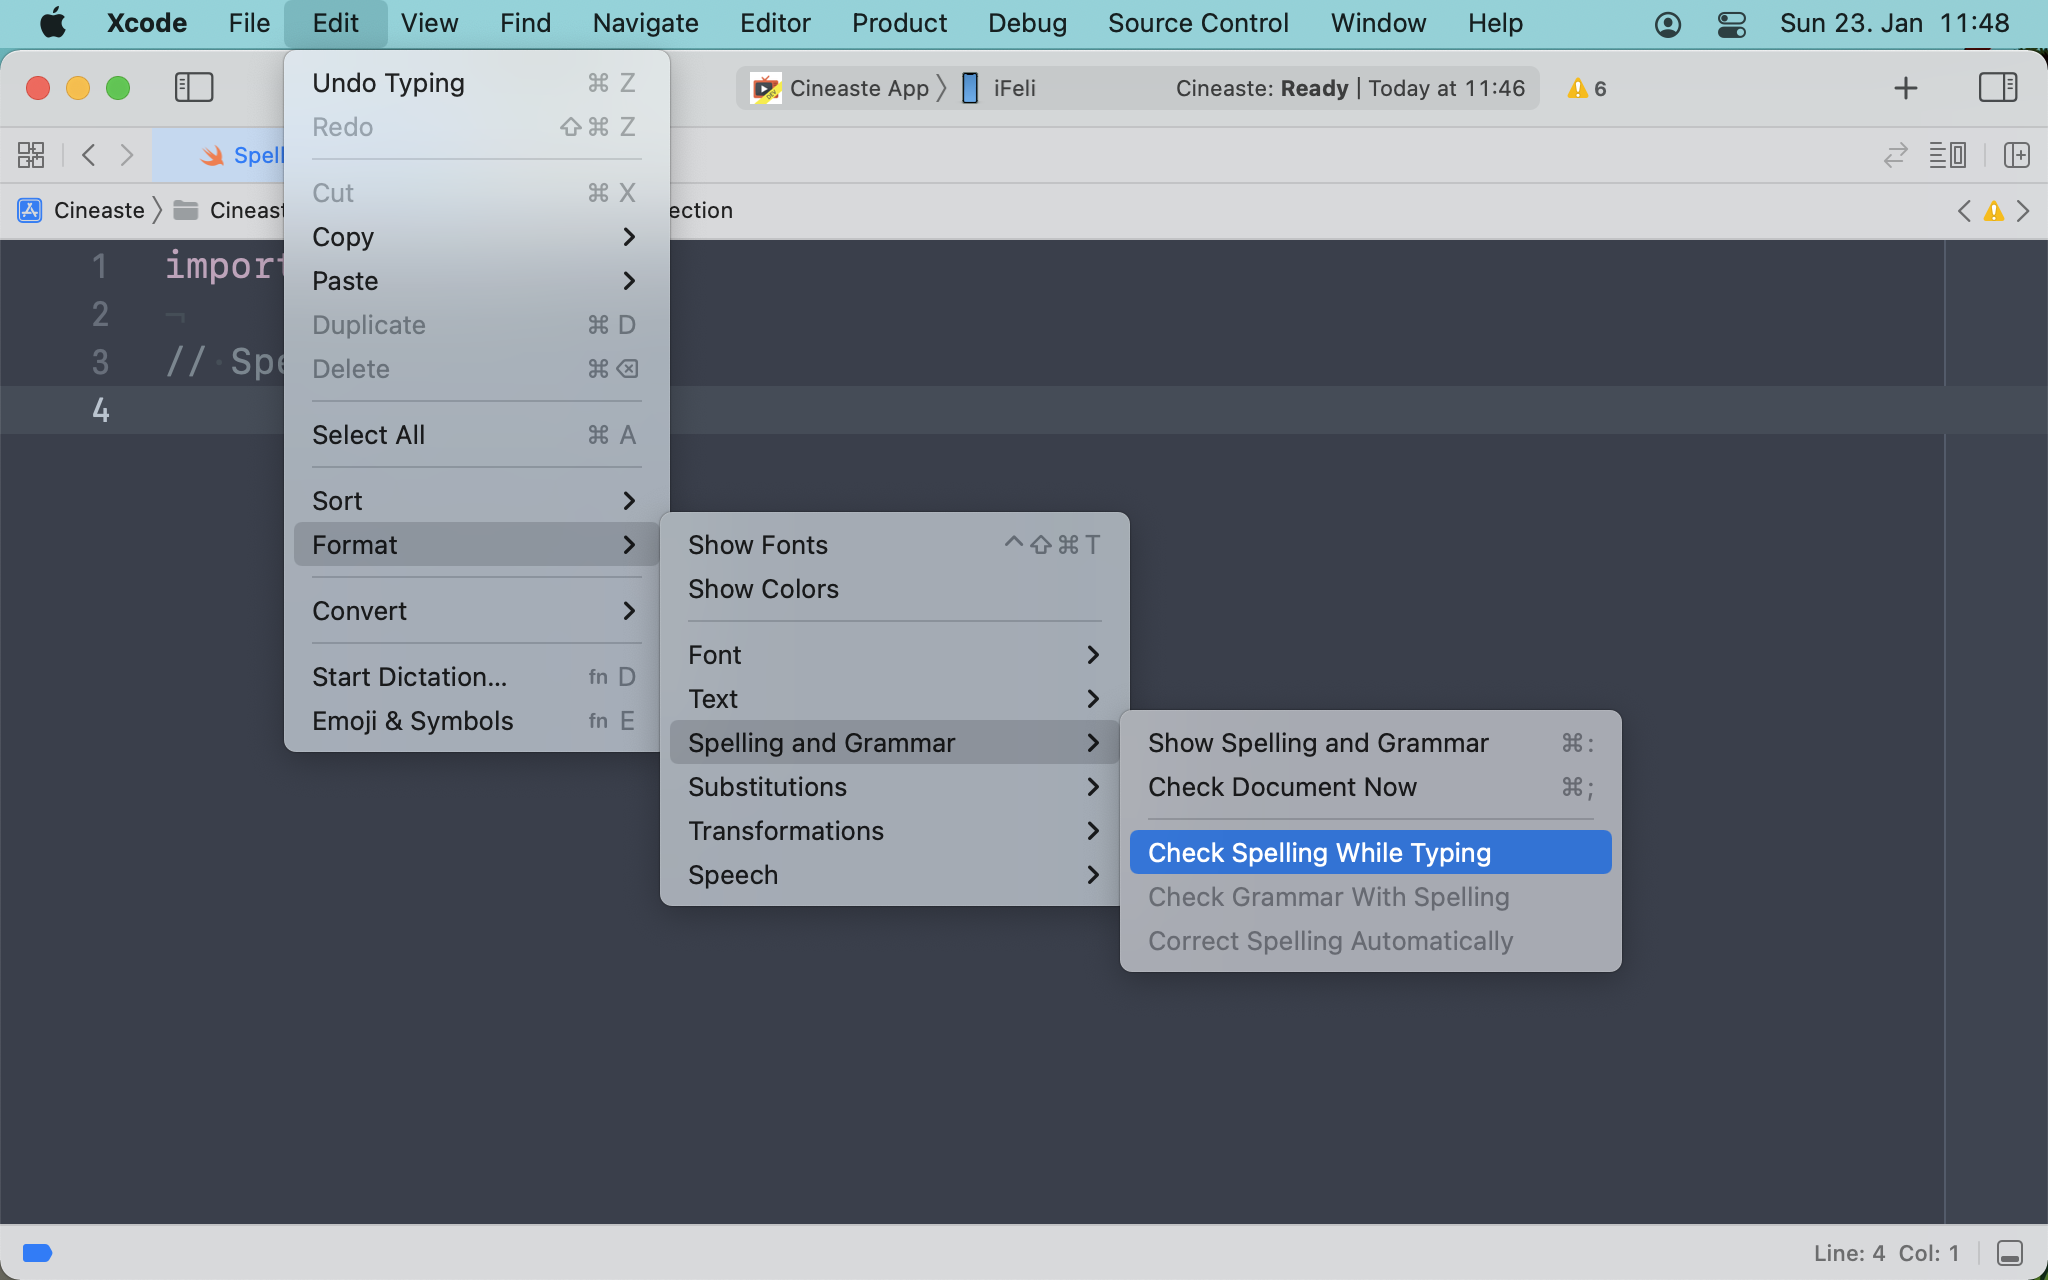 A screenshot from Xcode’s system menu to the setting